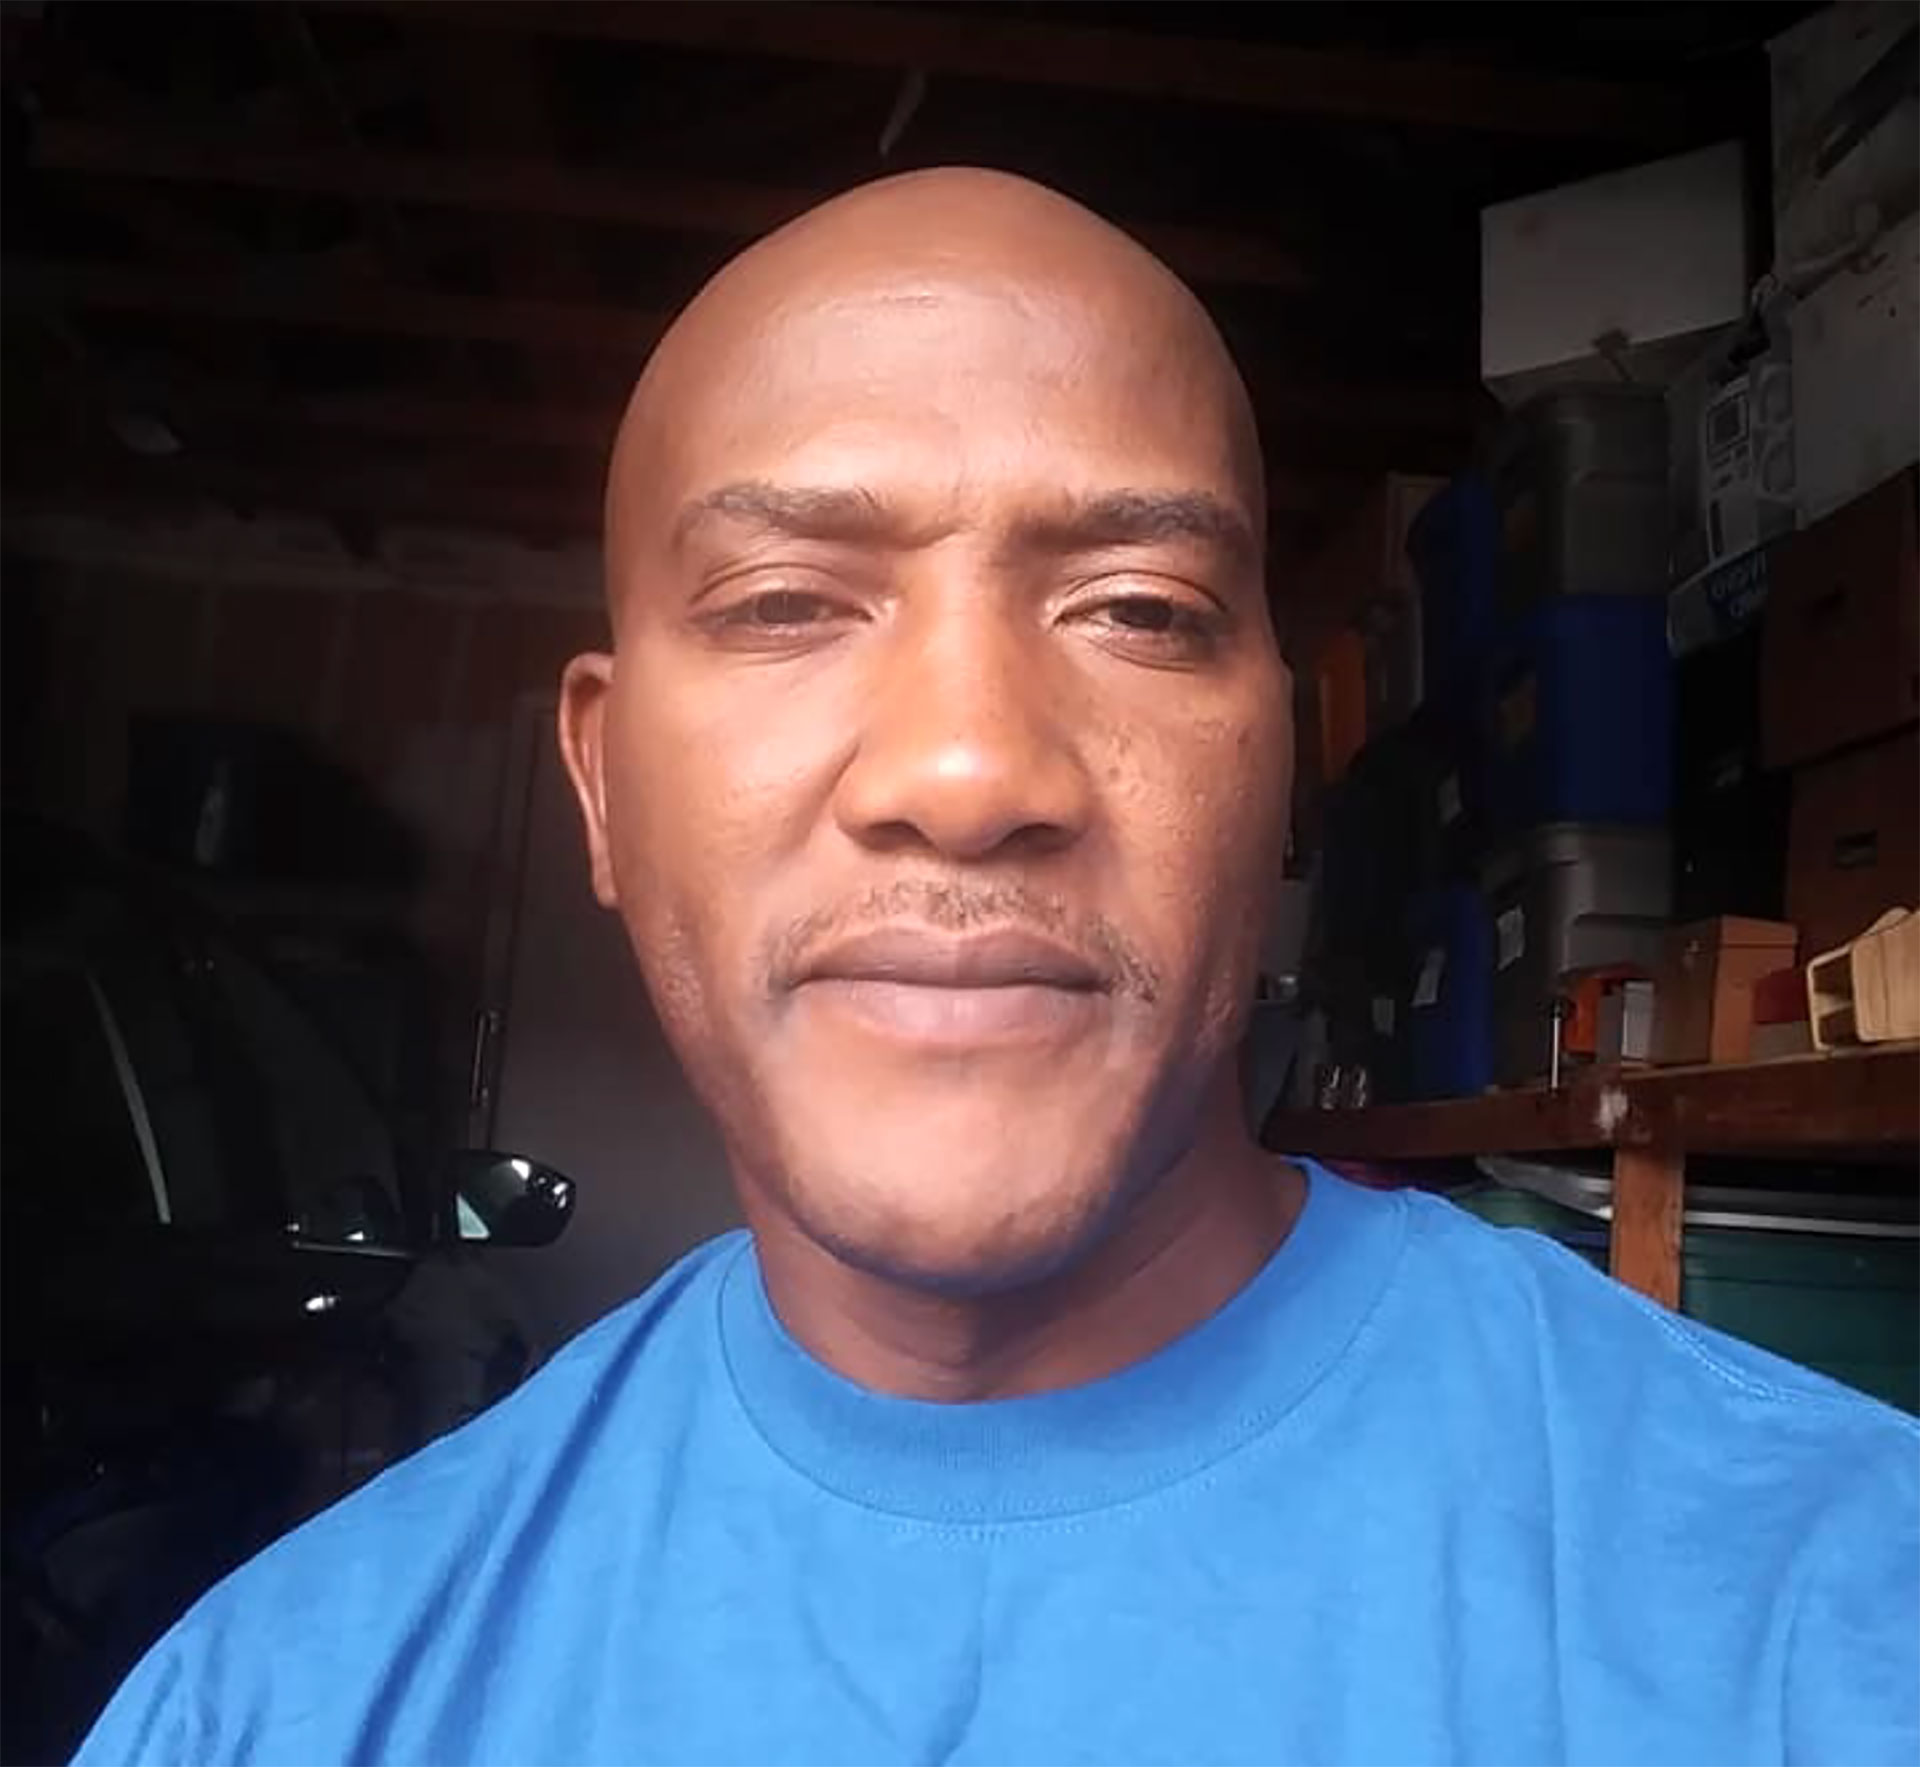 Larry Williams, who is incarcerated at San Quentin and has underlying health conditions that put him at risk of dying from COVID-19, tested positive for the virus after a correctional officer asked him to help move hundreds of boxes that had belonged to infected inmates transferred from Chino.